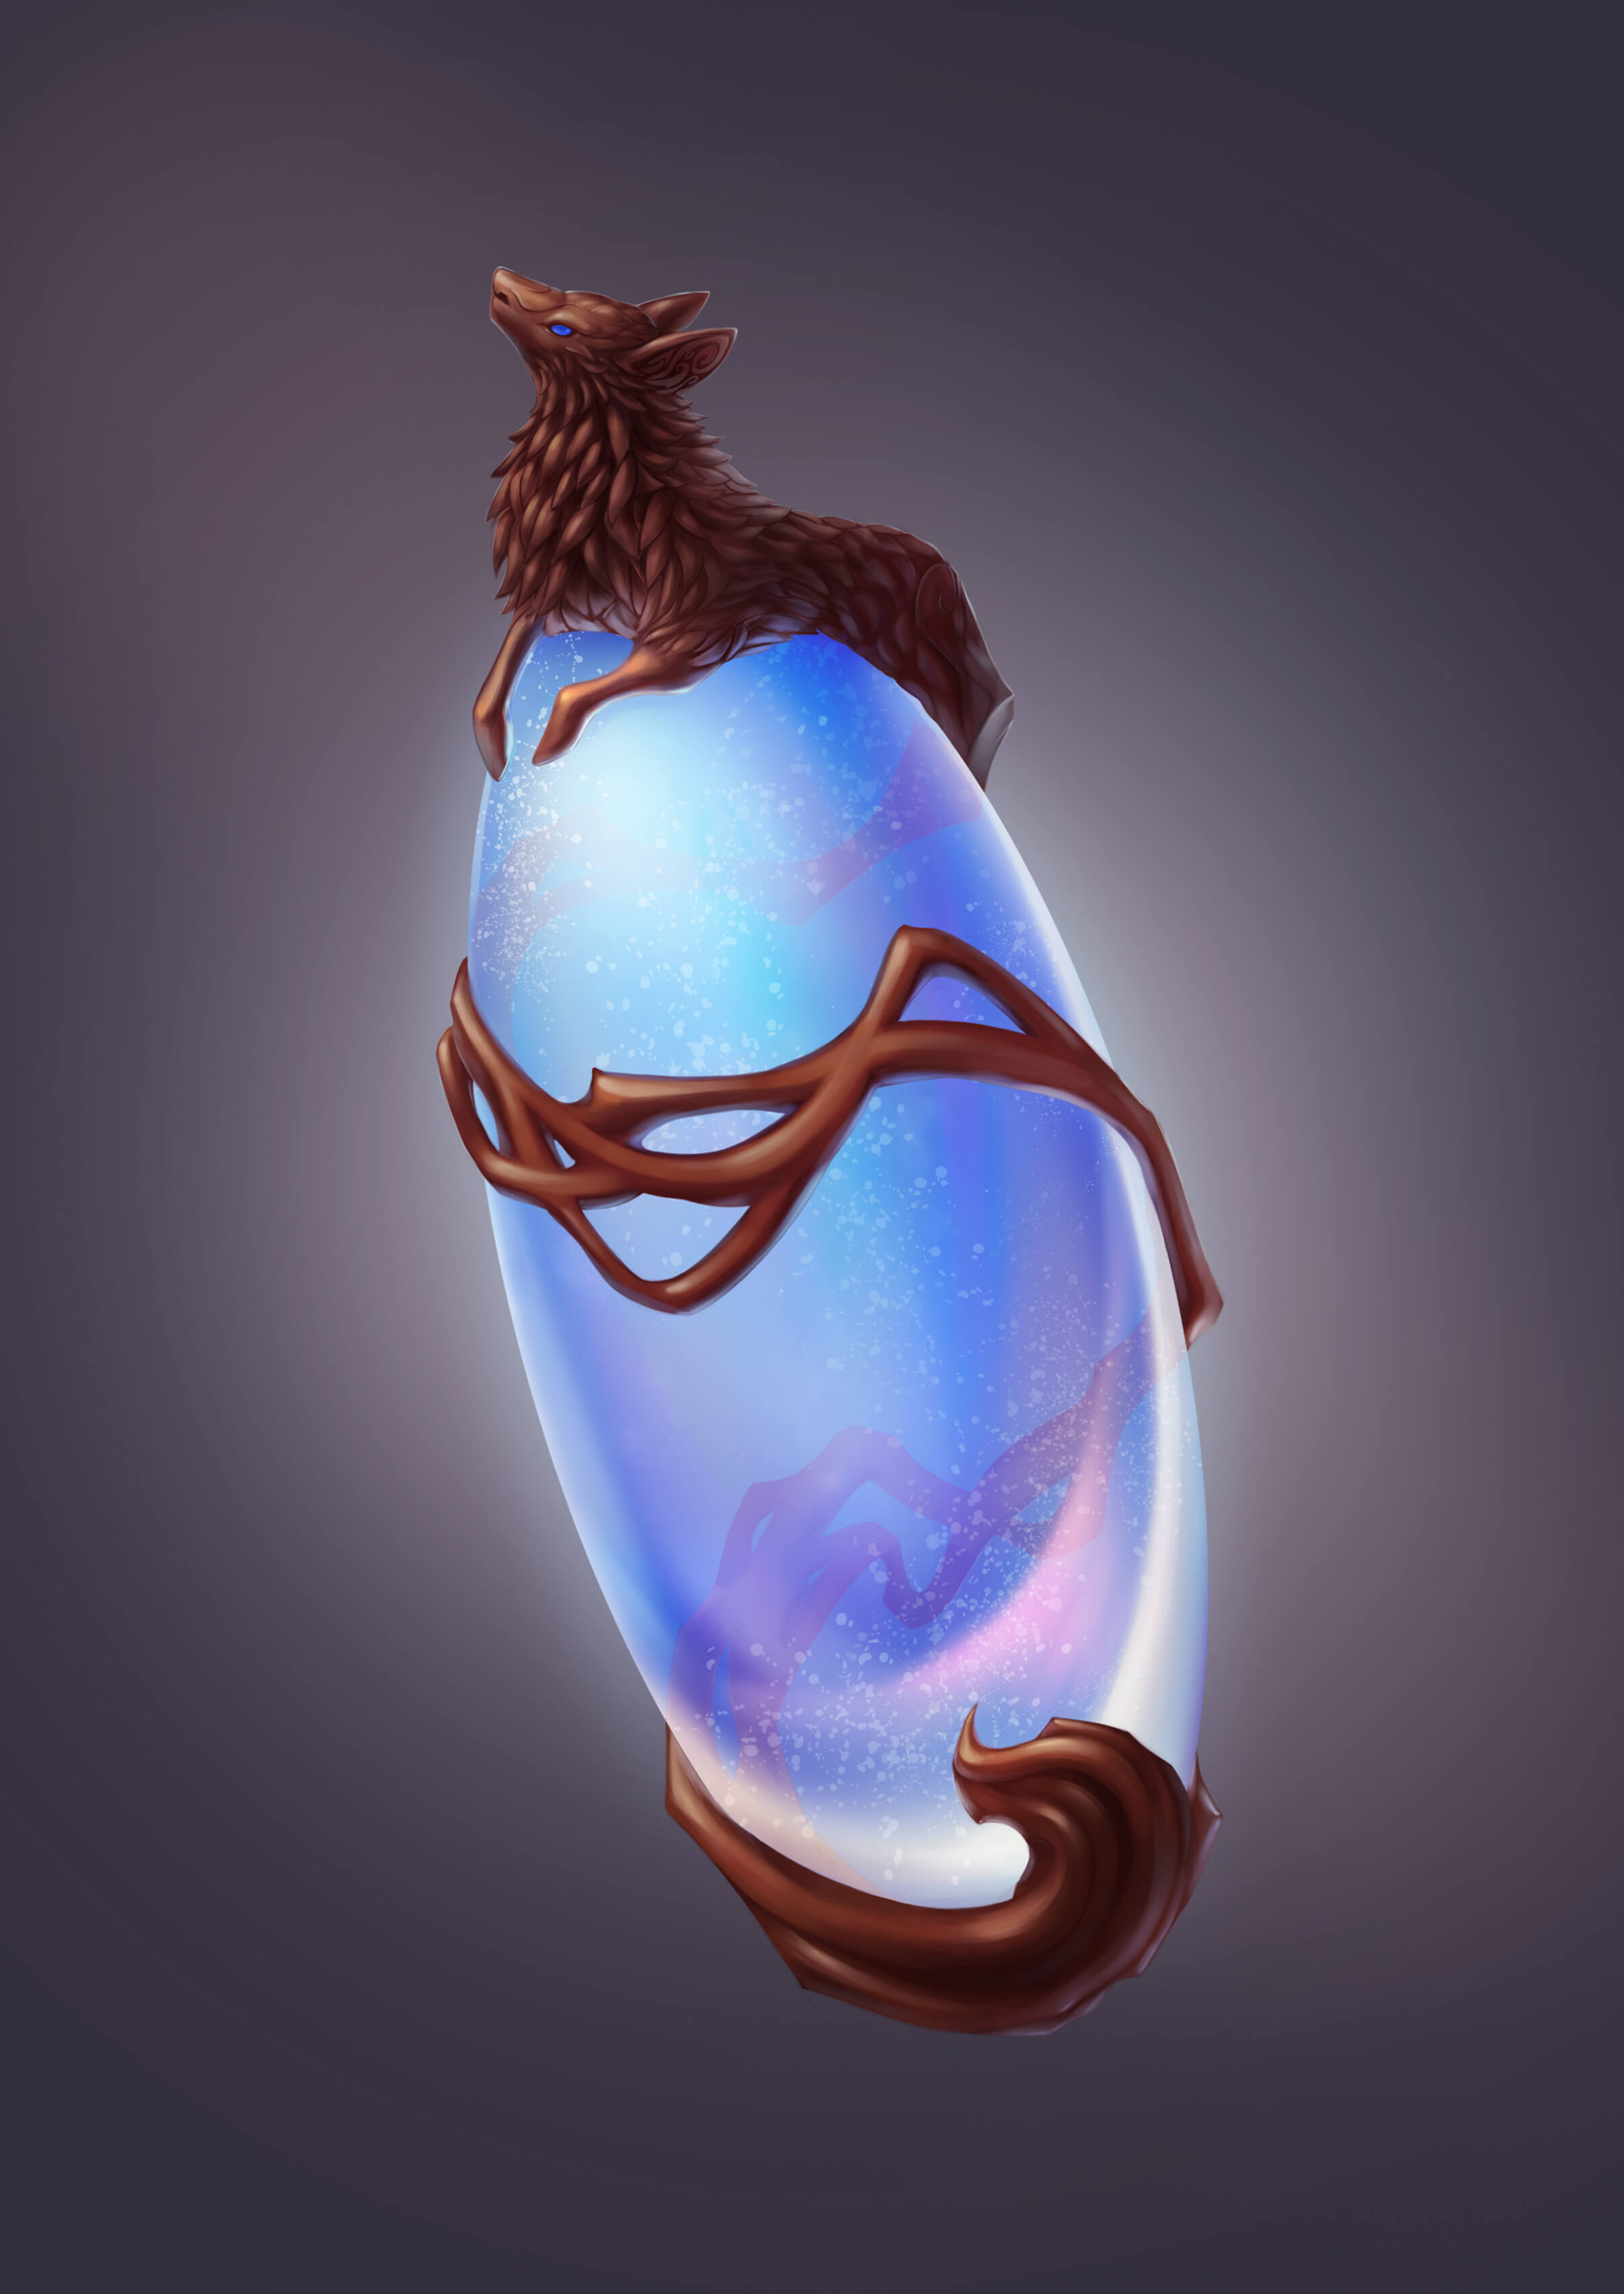 A translucent blue, egg-shaped gem enveloped by a brown lamb-like figure elongated to wrap around the gem's entirety.